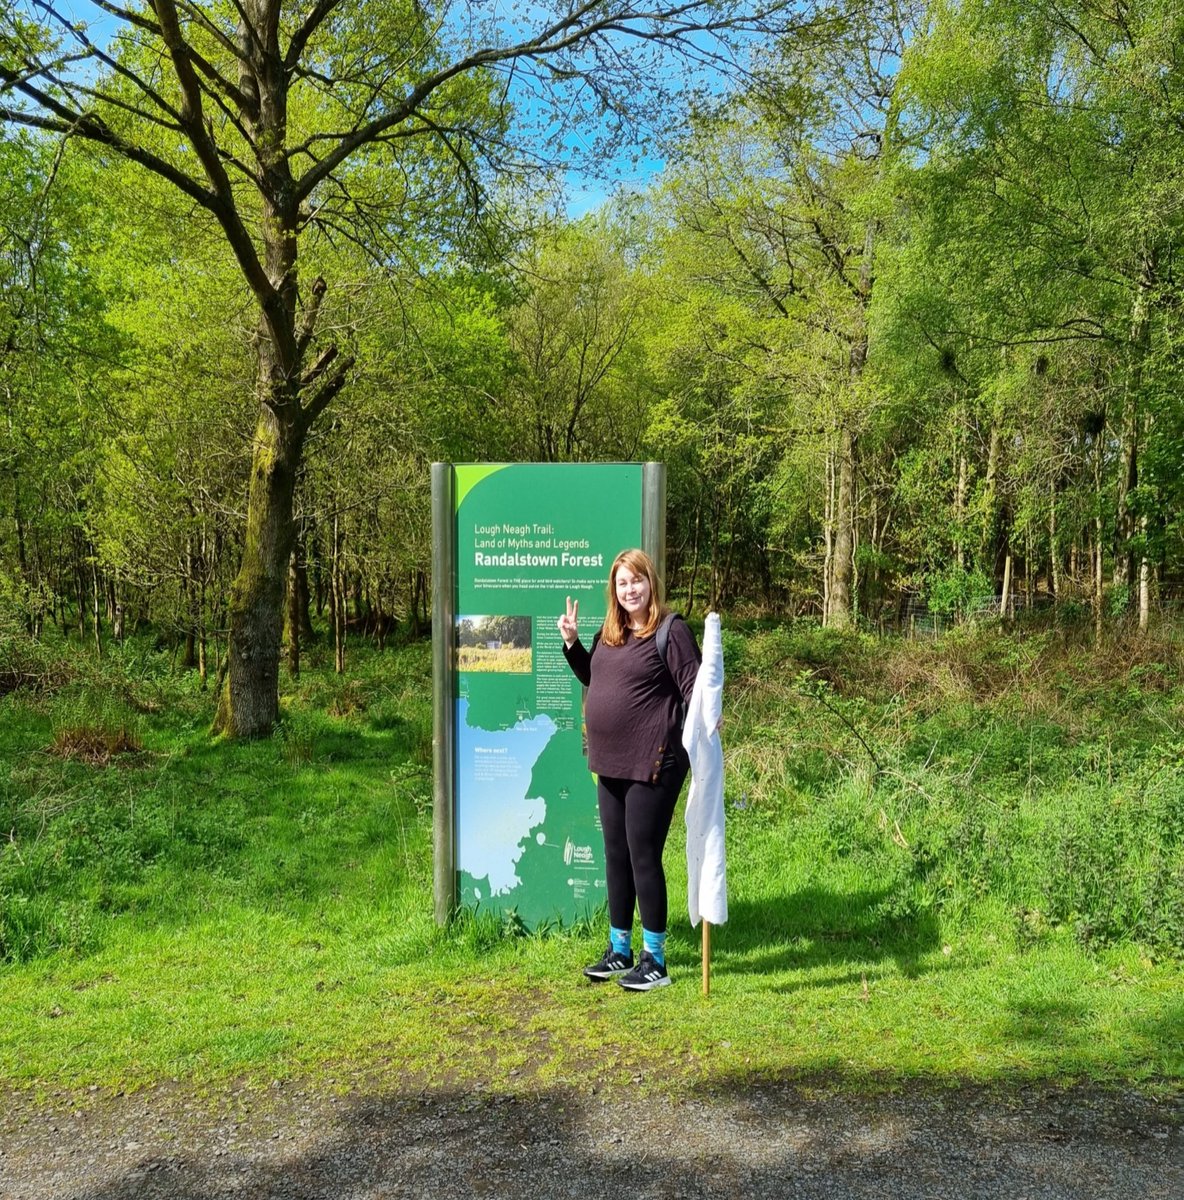 Me and my 32-week bump collecting ticks in Randalstown Forest today as part of the systematic surveillance chapter of my project. 

#Ticks #TickborneDiseases #PhD #NorthernIreland